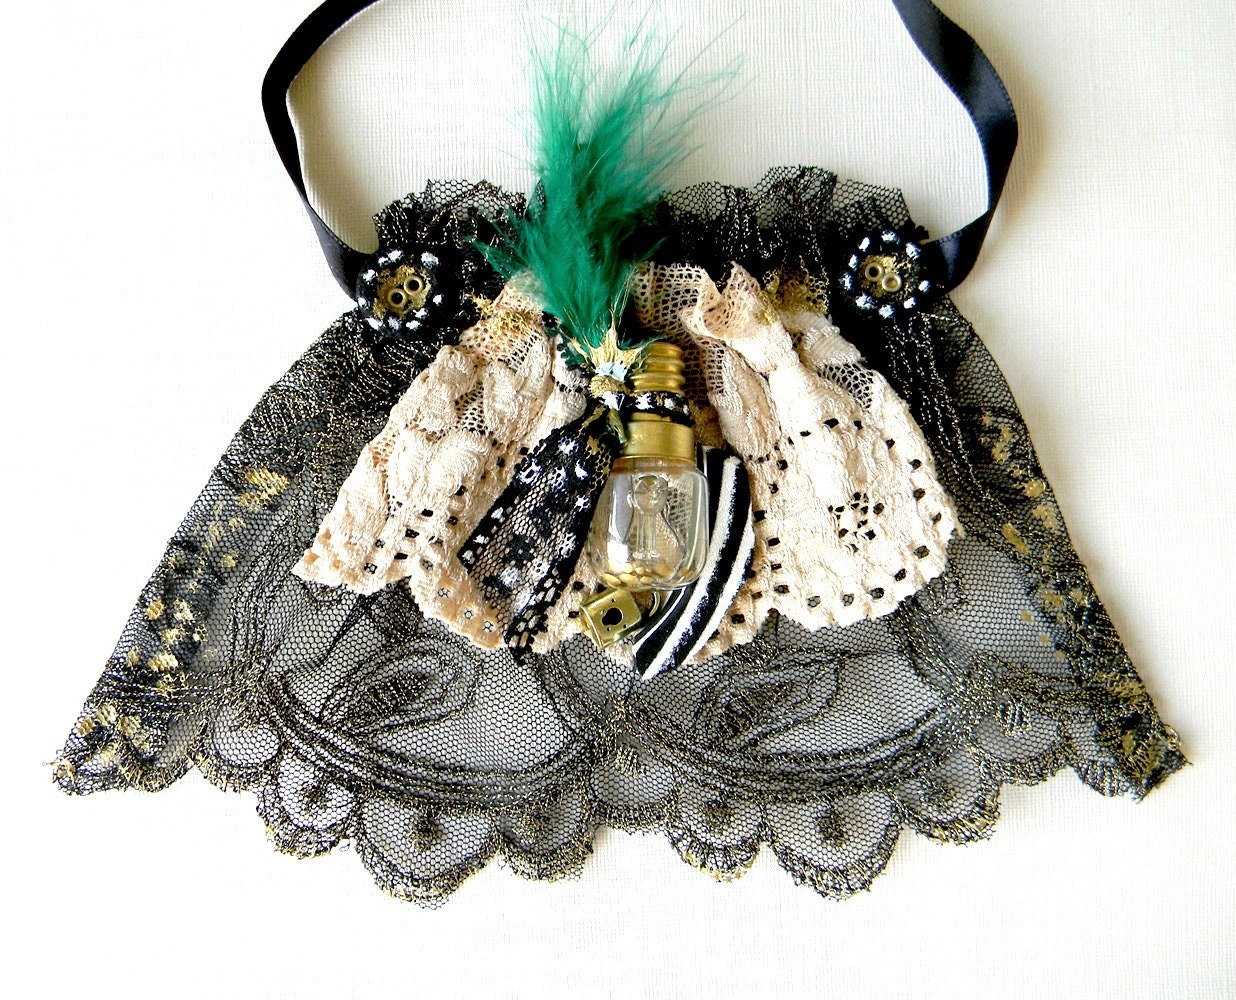 Victorian jabot, necktie,green black, ruffle, upcycle jabot, vintage, spring fashion, feather, romantic steampunk , nude lace, one of a kind - Elyseeart